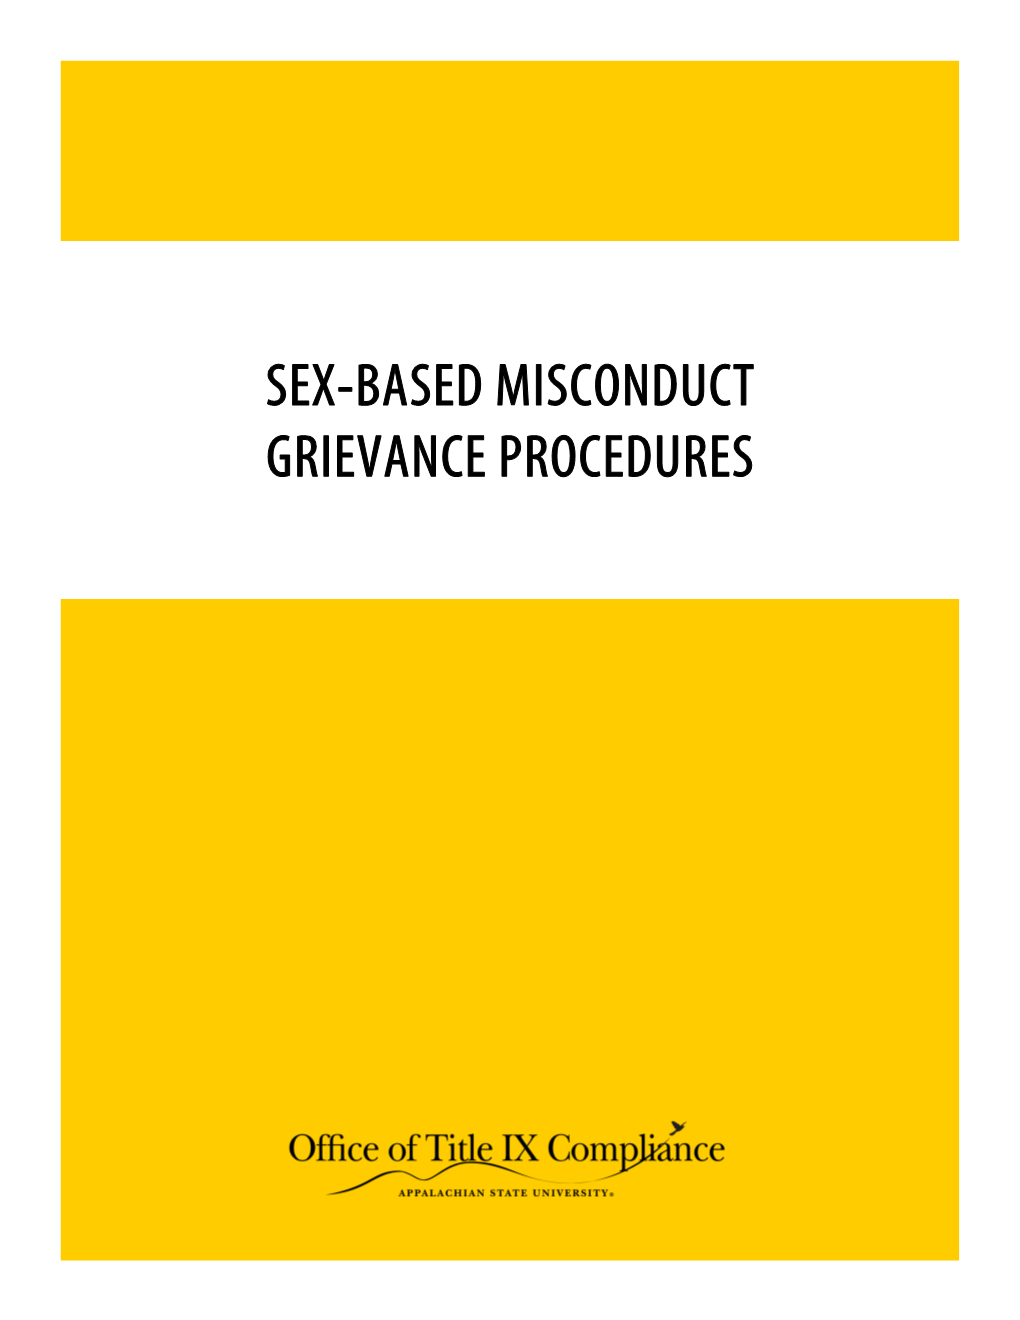 GRIEVANCE PROCEDURES Table of Contents